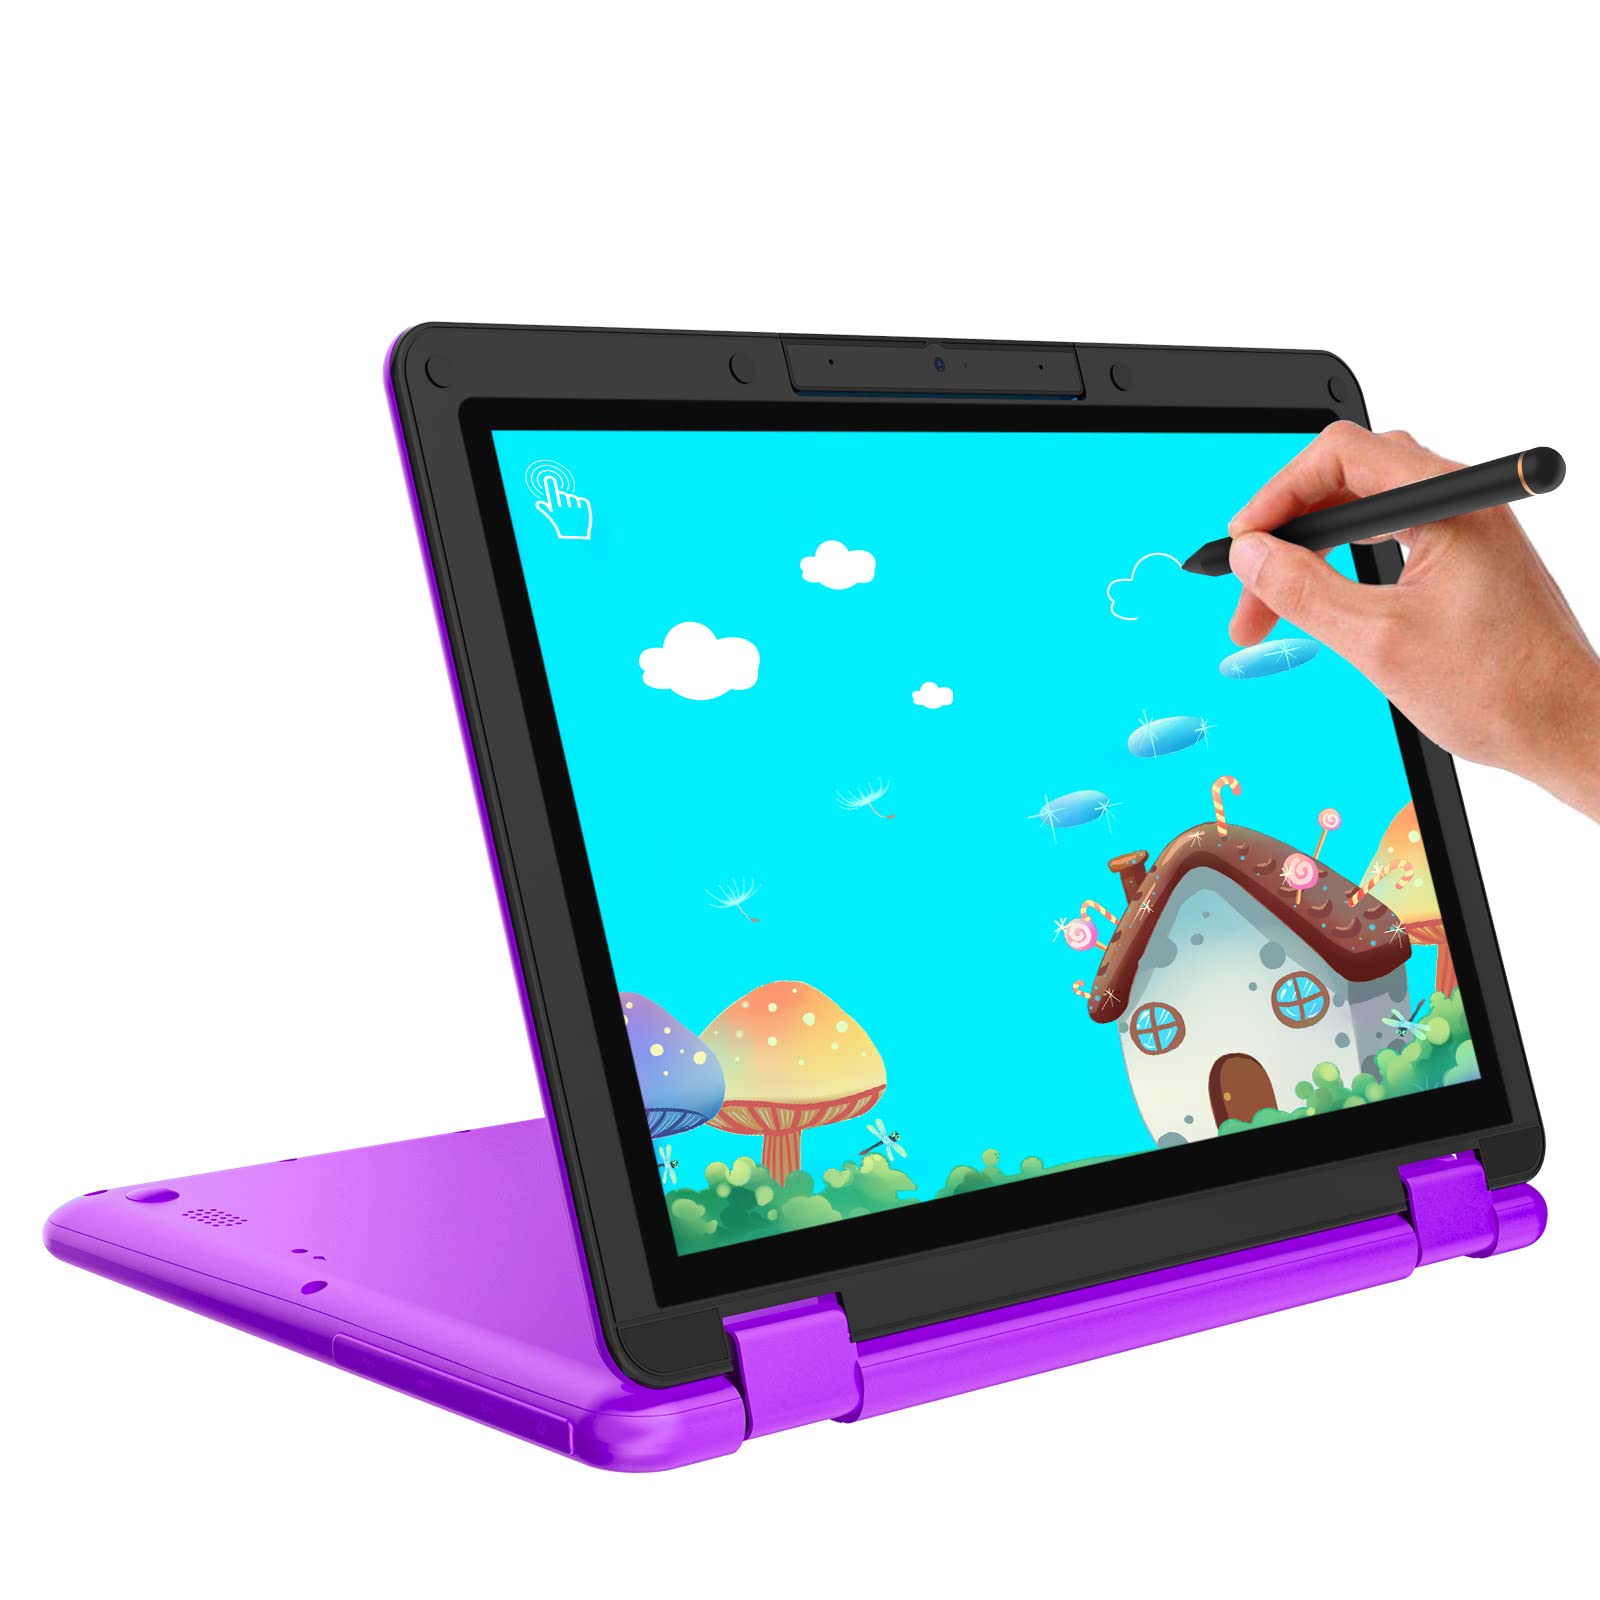 AWOW Purple 11.6" FHD 2 in 1 Touchscreen Laptop with Stylus, Intel N4120 Processor 6GB RAM 256GB M.2 SSD Storage Kids Convertible Laptop